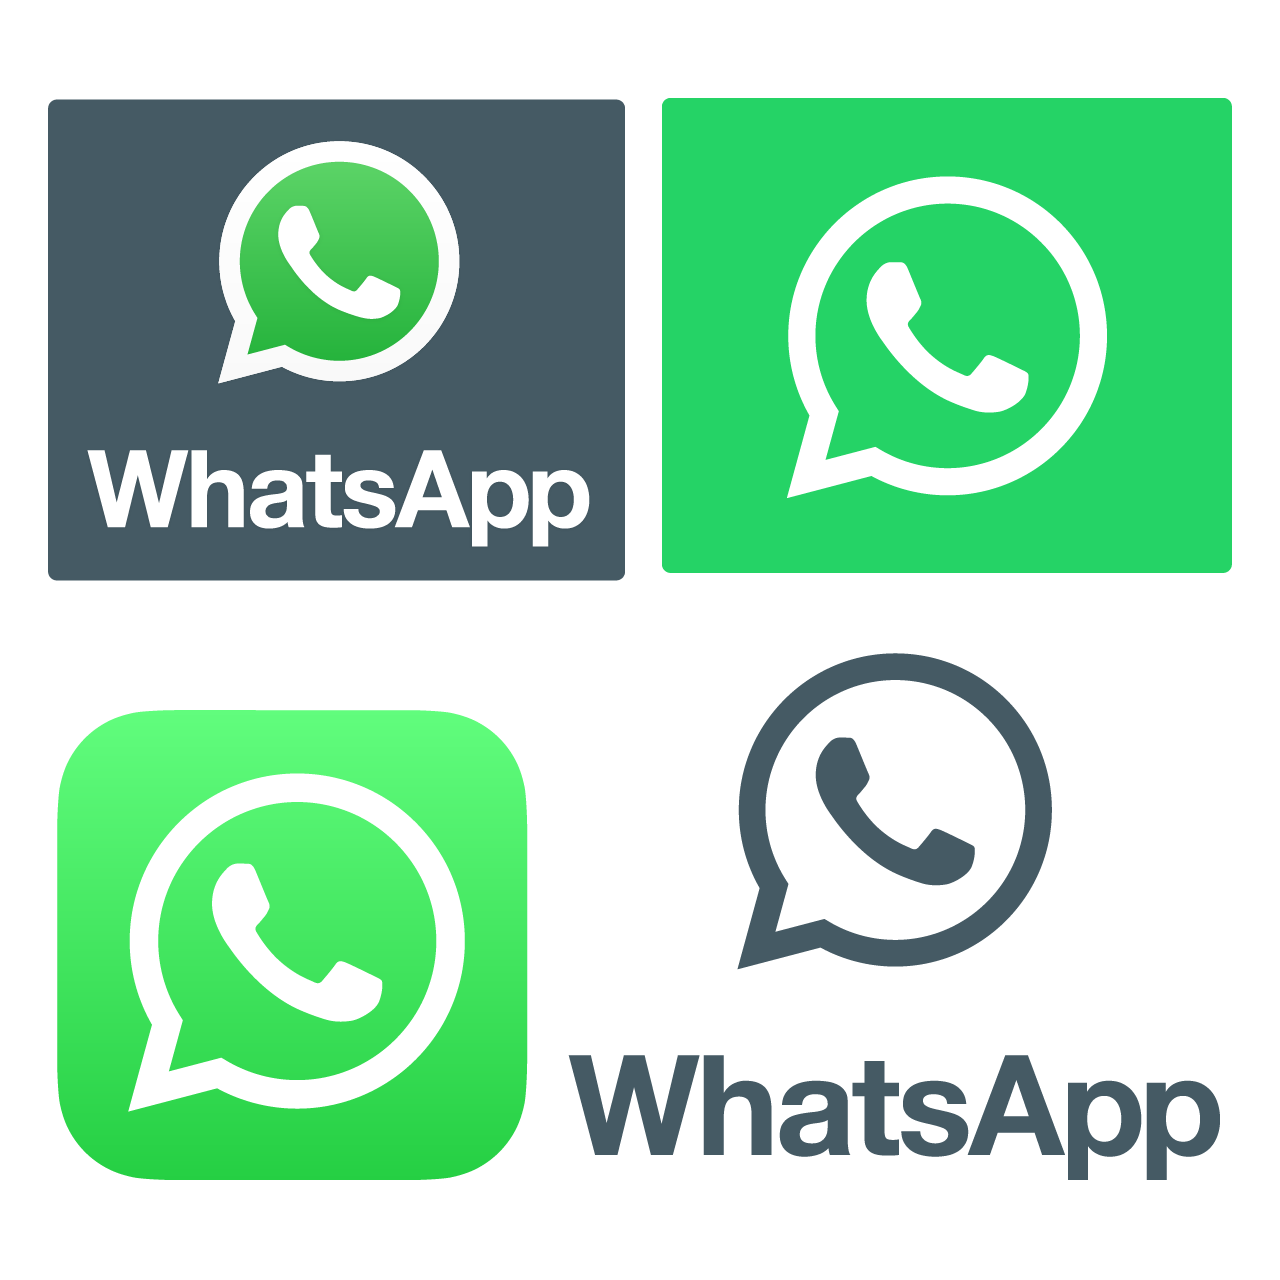 Vector Whatsapp Icon Svg Don't combine the whatsapp name or logos, or any portion of any of them, with any other logo. vector whatsapp icon svg